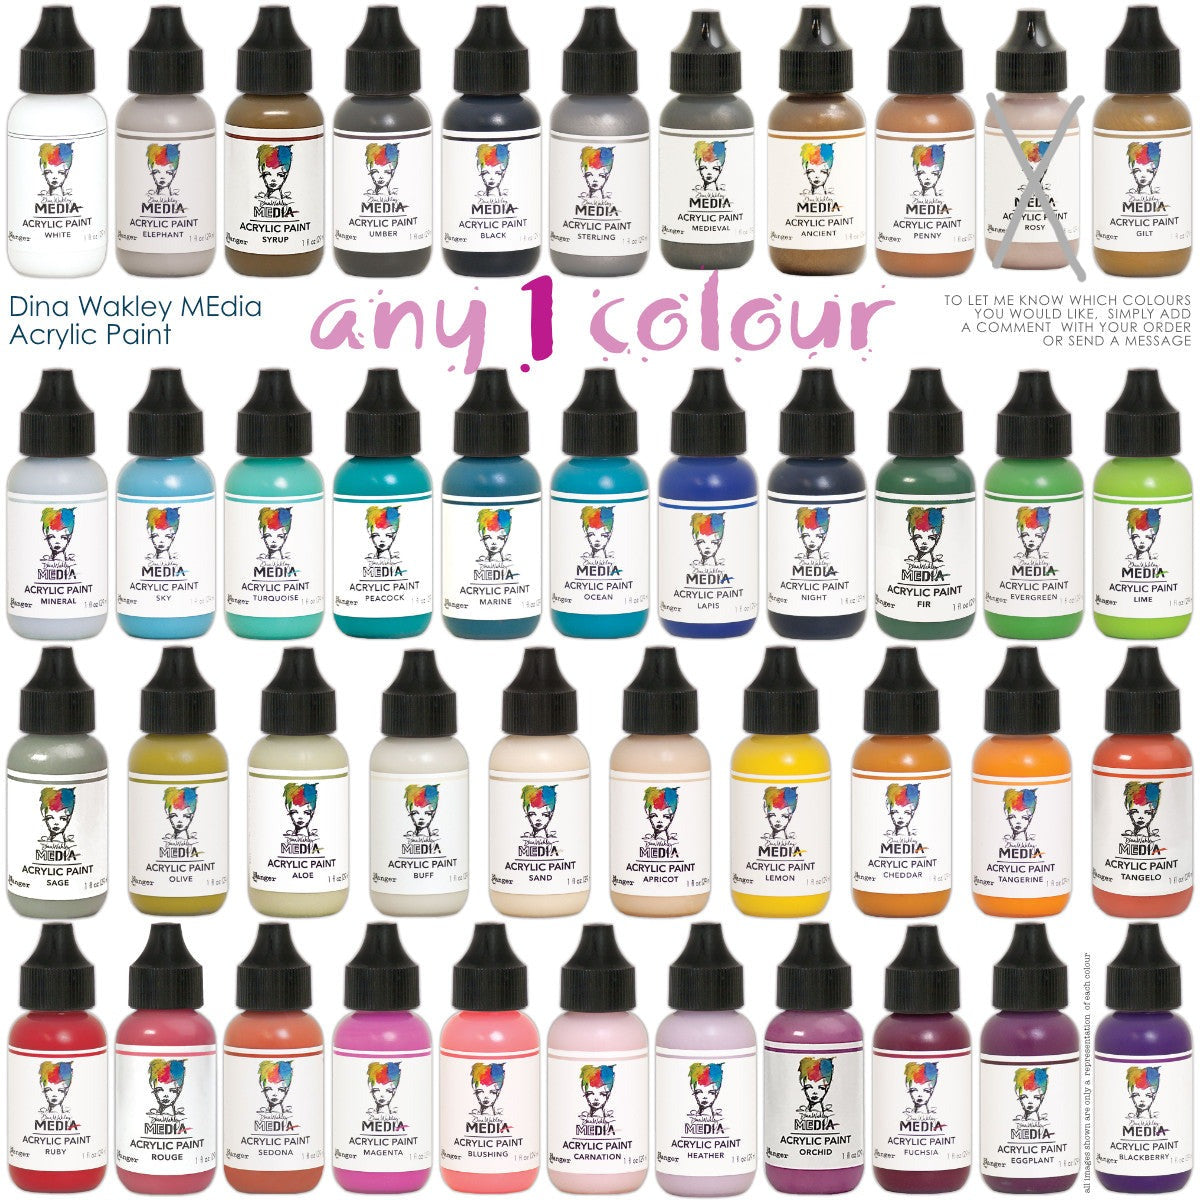 Acrylic Paint - Choose any 1 (one) colour ... by Dina Wakley MEdia and Ranger Ink. Each bottle holds 1 fl oz (29ml) of thick buttery acrylic paint and has a fine tipped nozzle. Over 30 essential colours at Art by Jenny in Australia